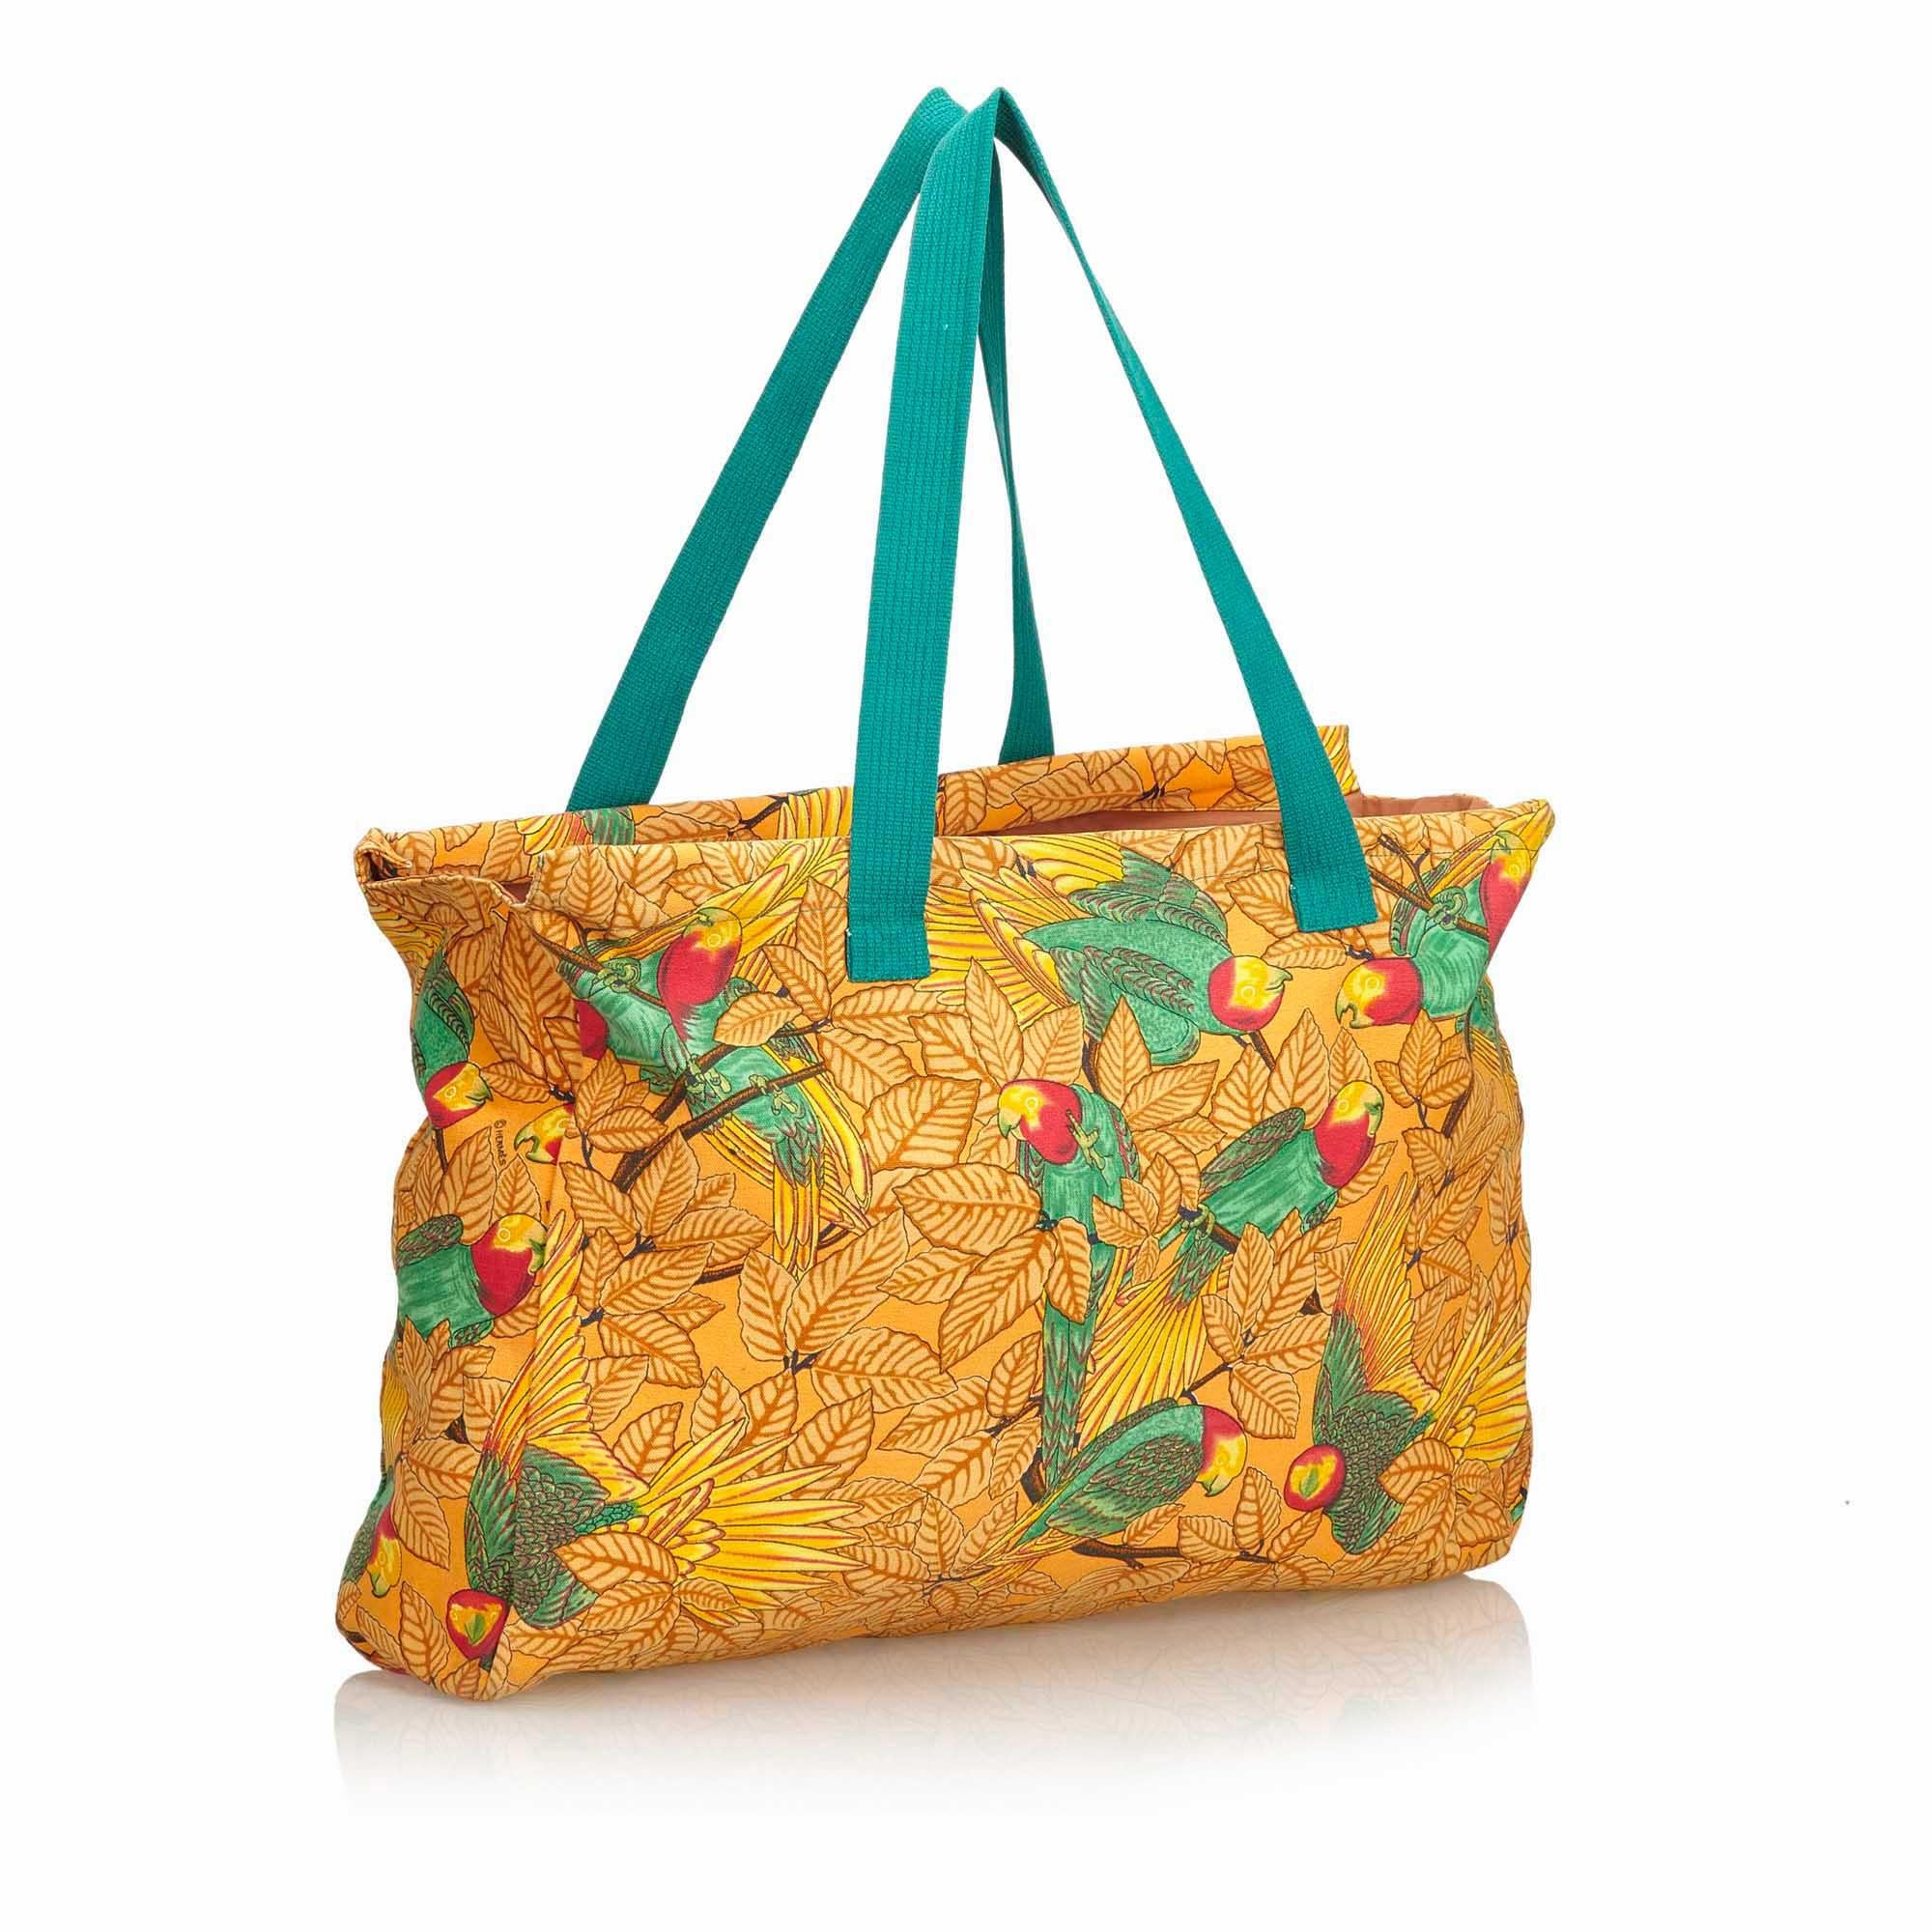 This tote bag features a printed canvas body, flat handles, and an open top. It carries as AB condition rating.

Inclusions: 
This item does not come with inclusions.

Dimensions:
Length: 34.00 cm
Width: 46.00 cm
Depth: 9.00 cm
Hand Drop: 25.00